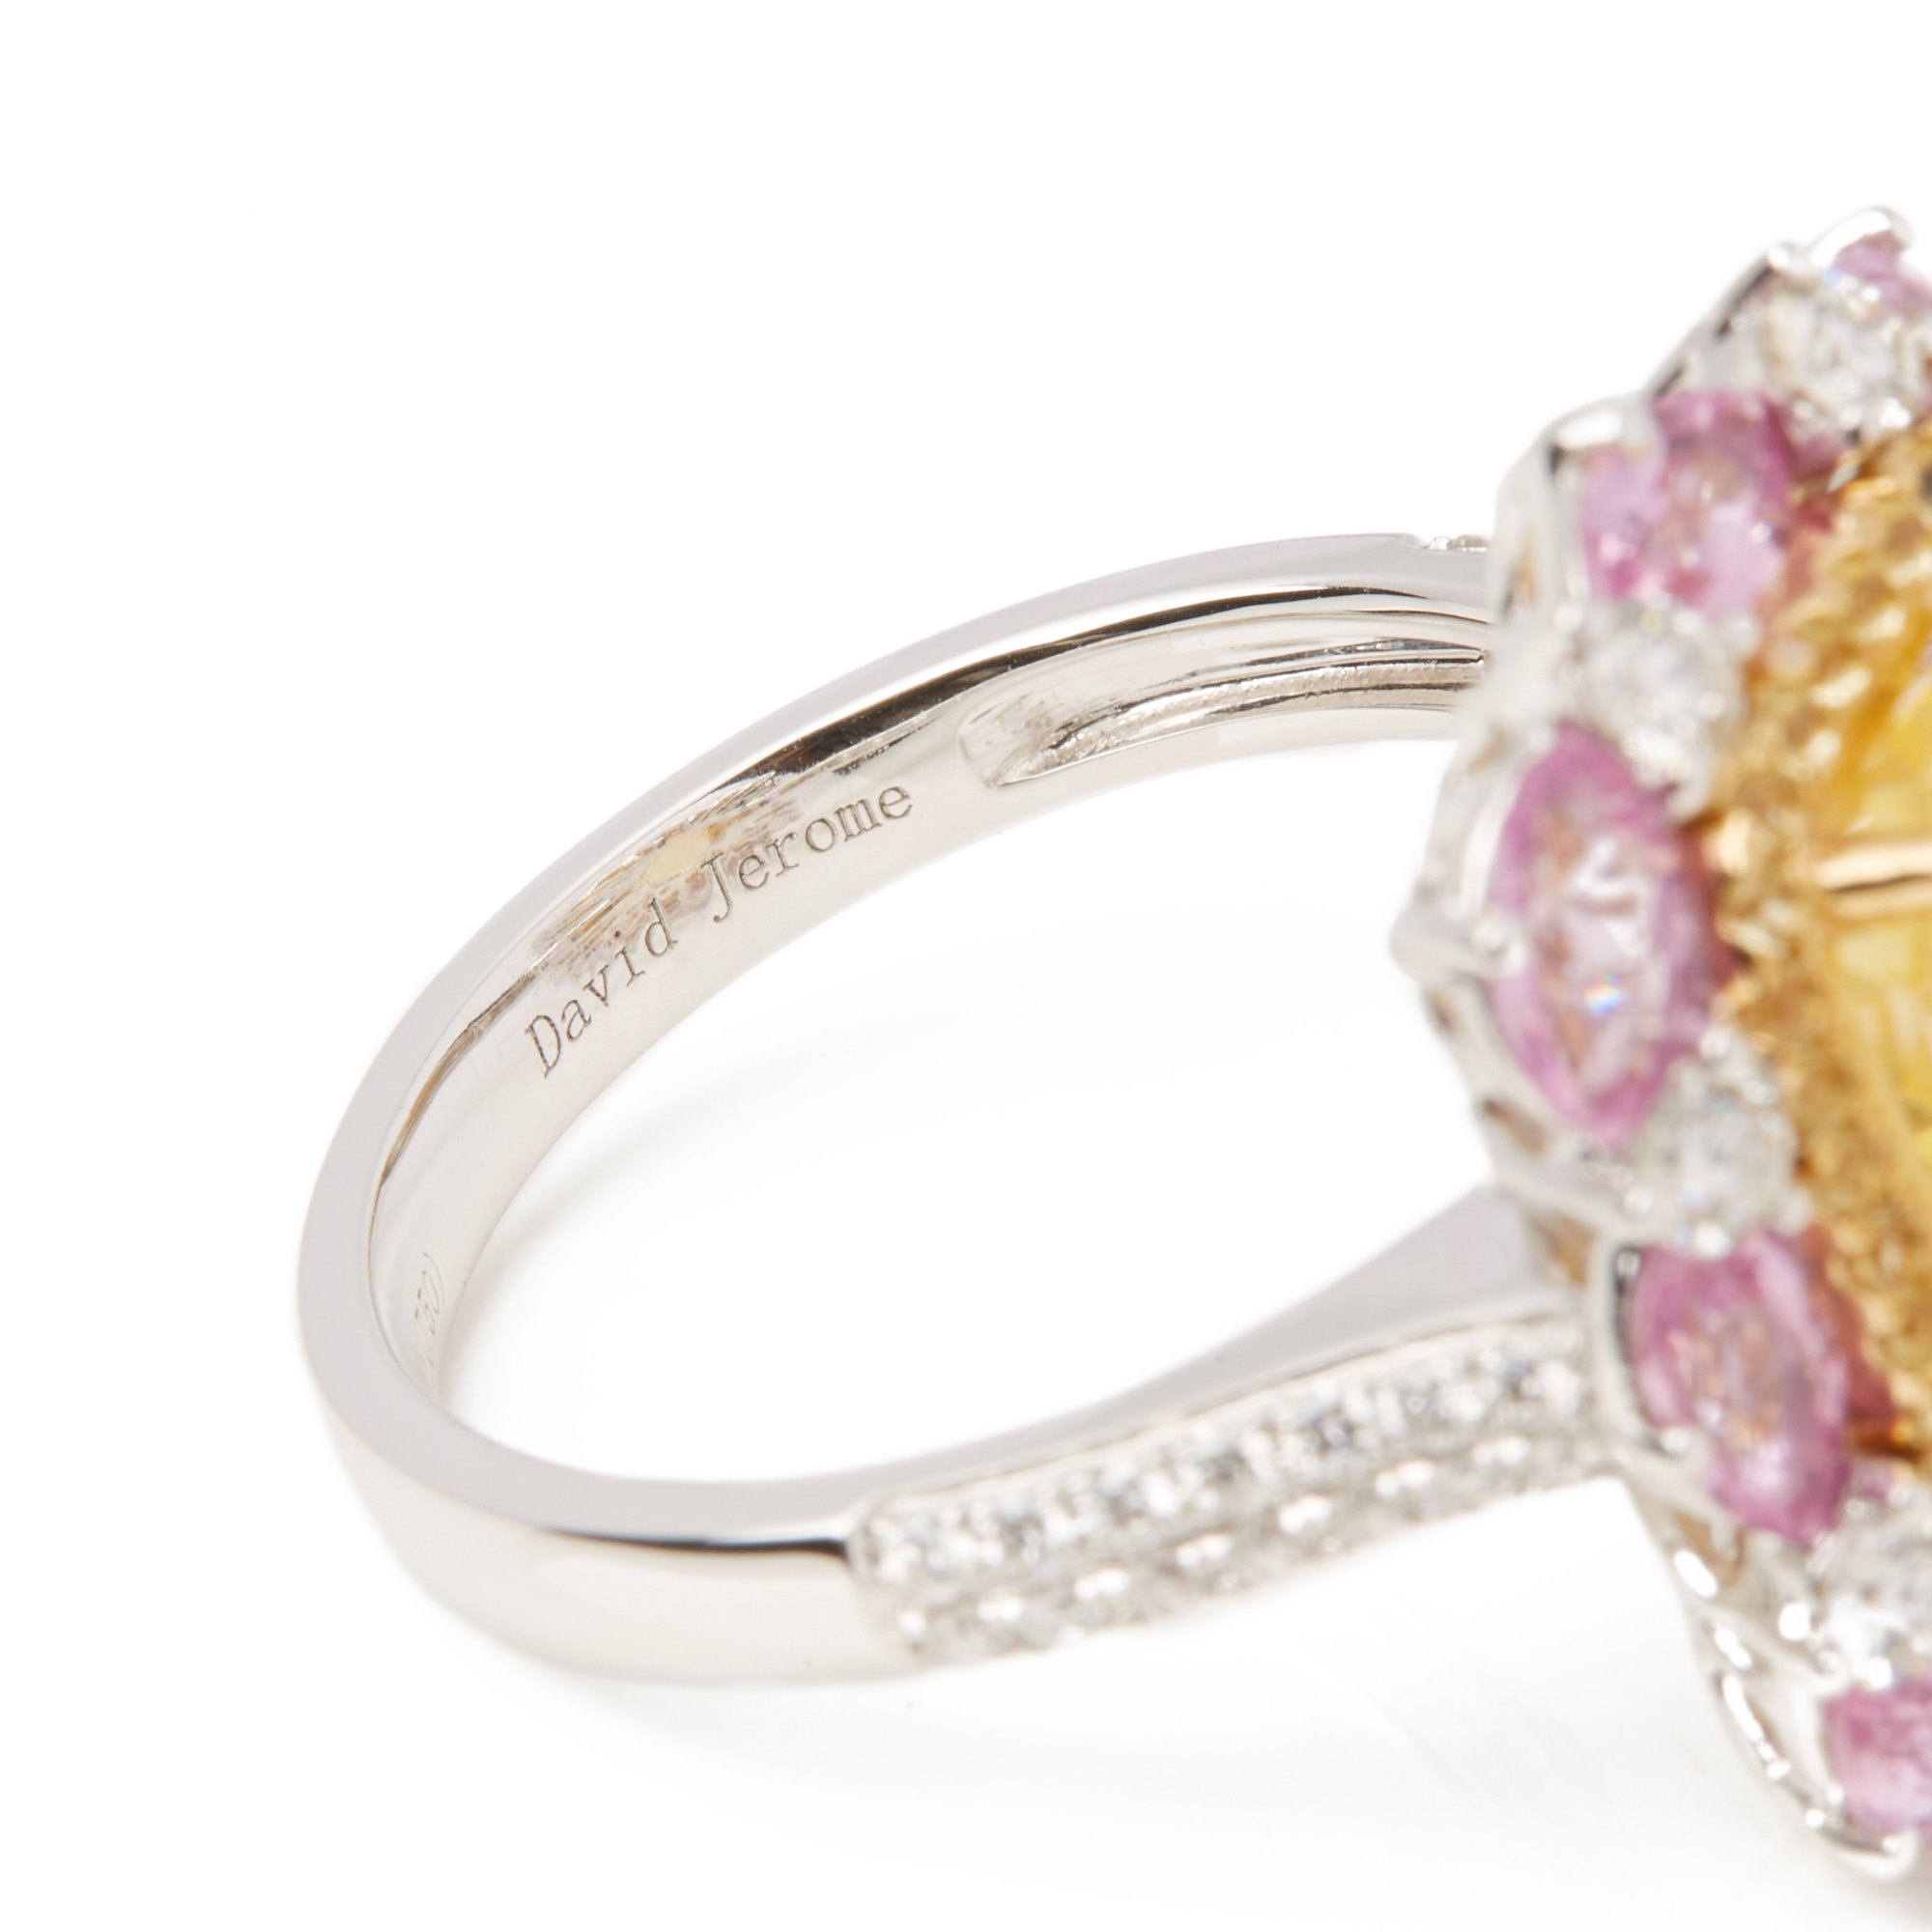 David Jerome 18ct White Gold Yellow Sapphire, Diamond and Pink Sapphire Cluster Ring